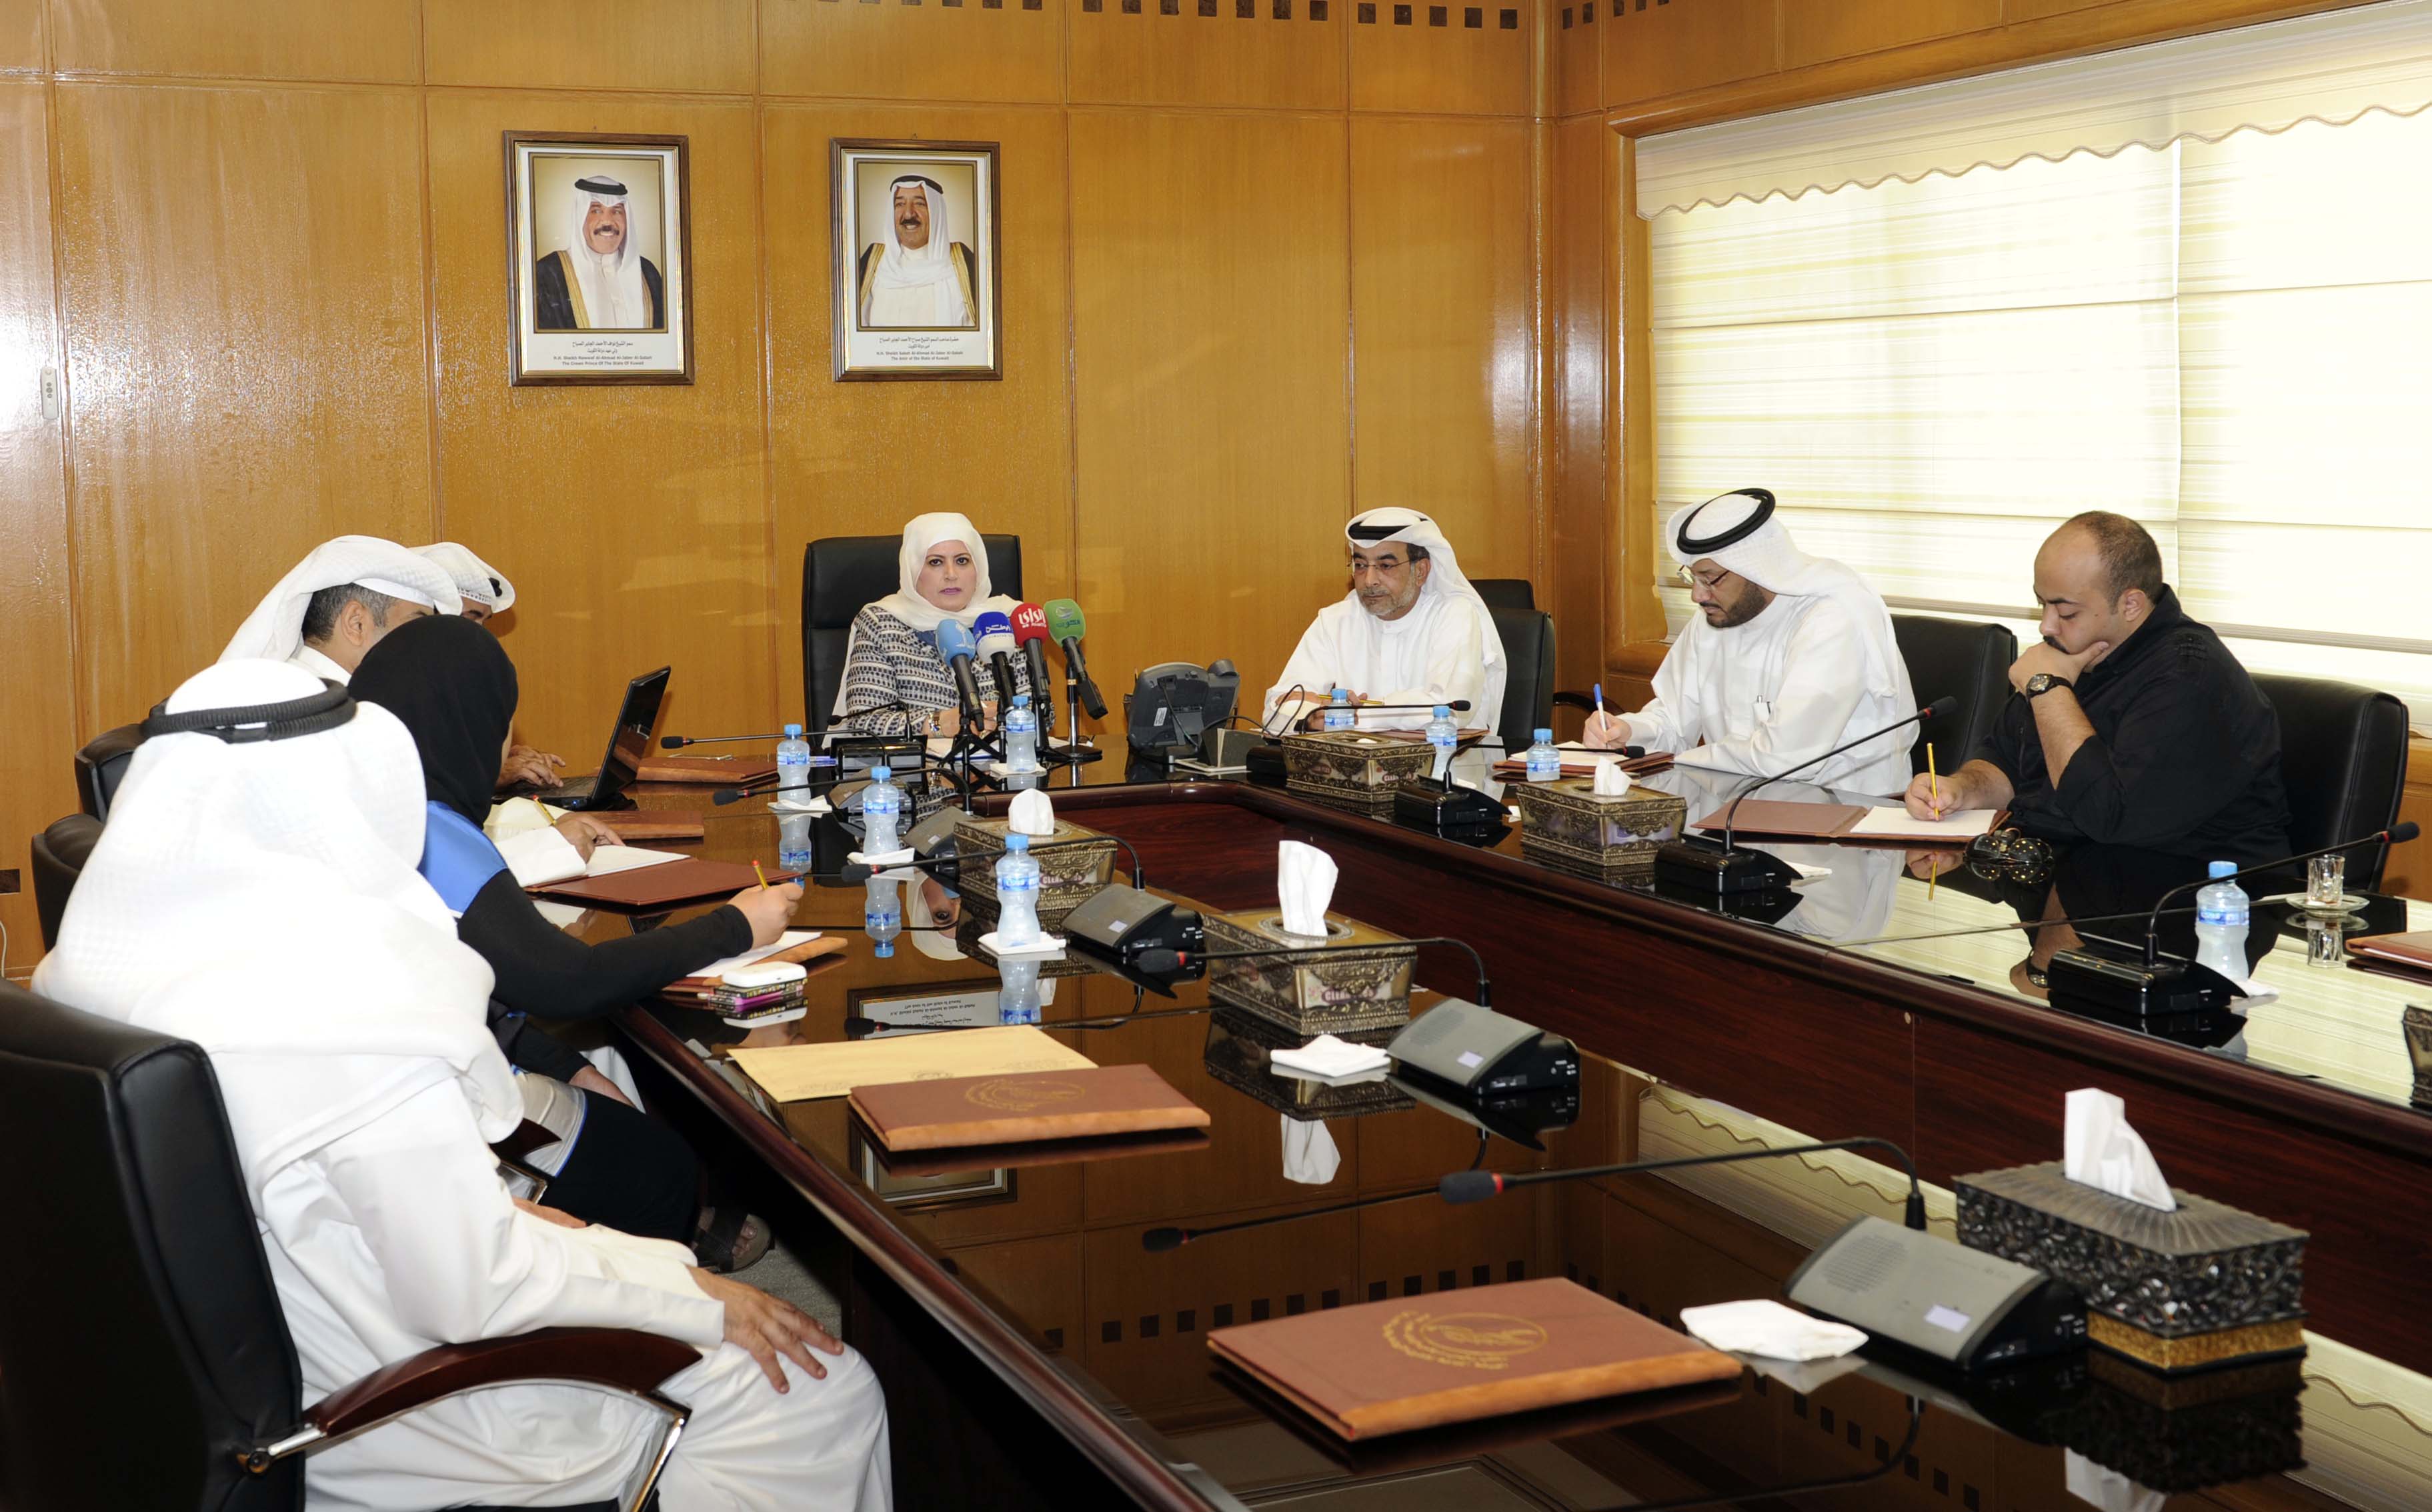 Director General of the Public Authority of Agriculture Affairs and Fish Resources (PAAFR) Nabila Al-Khalil during the meeting